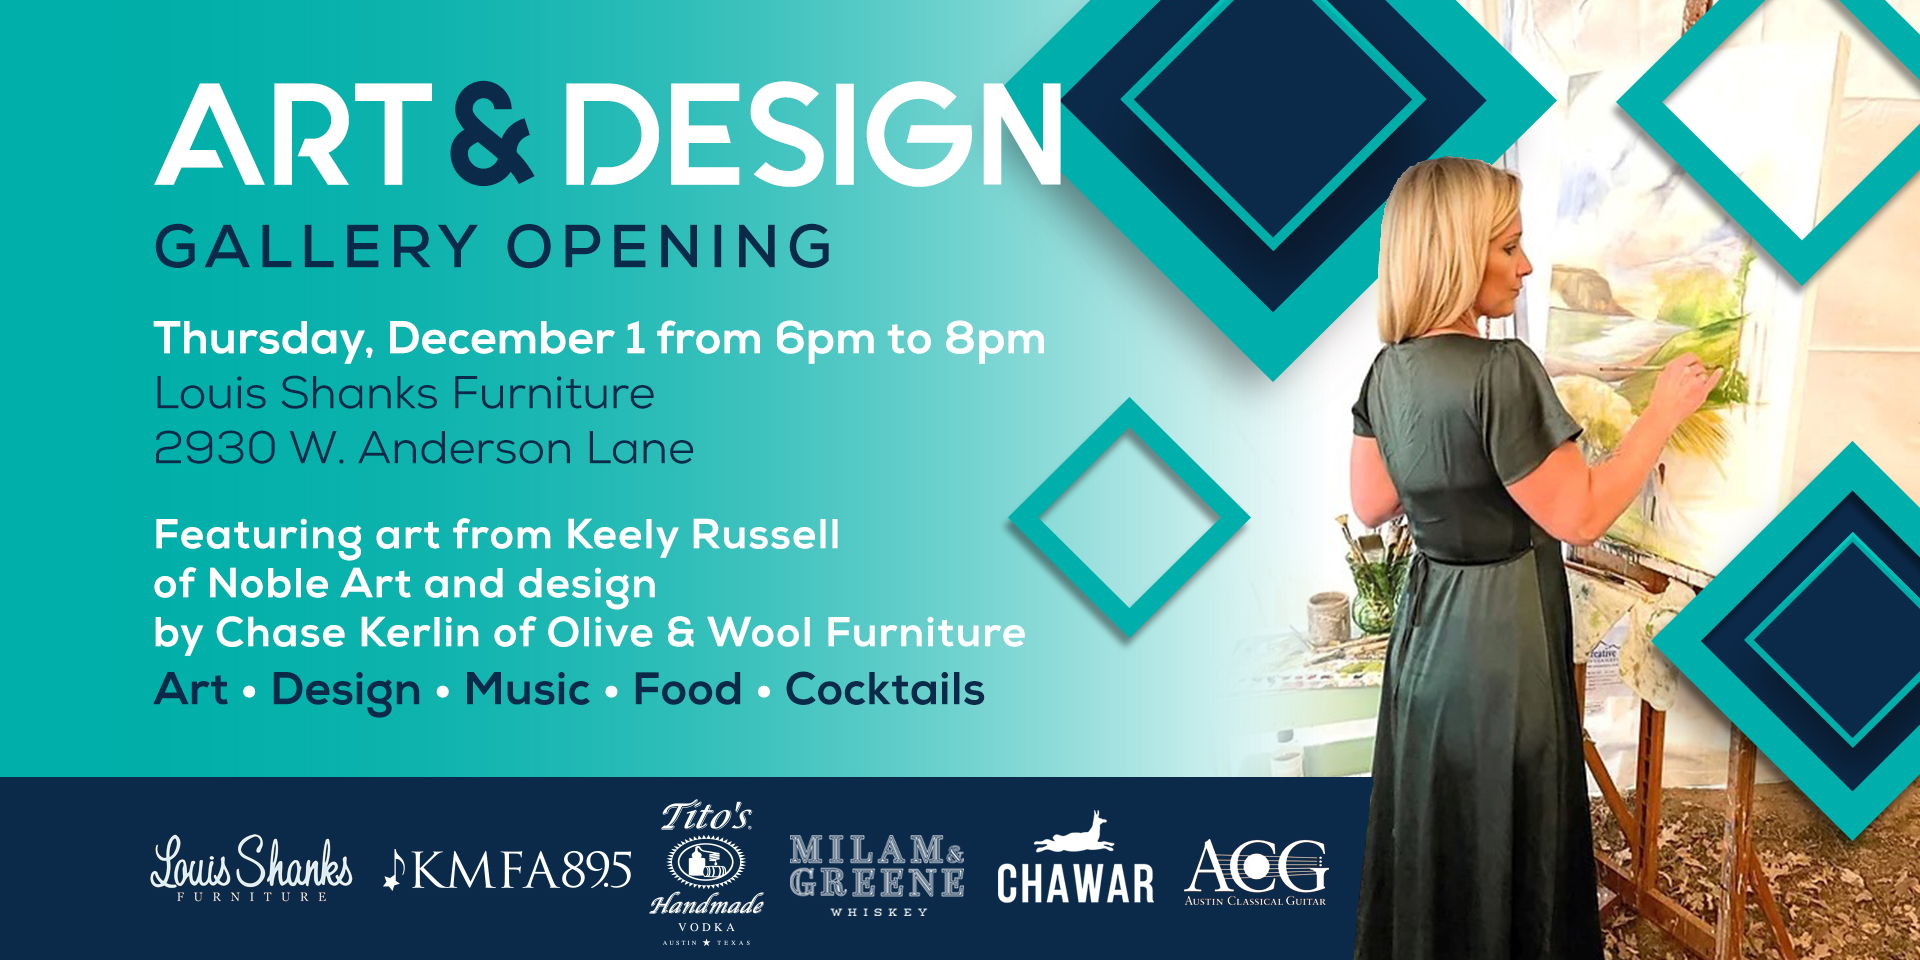 Art & Design Gallery Opening promotional image